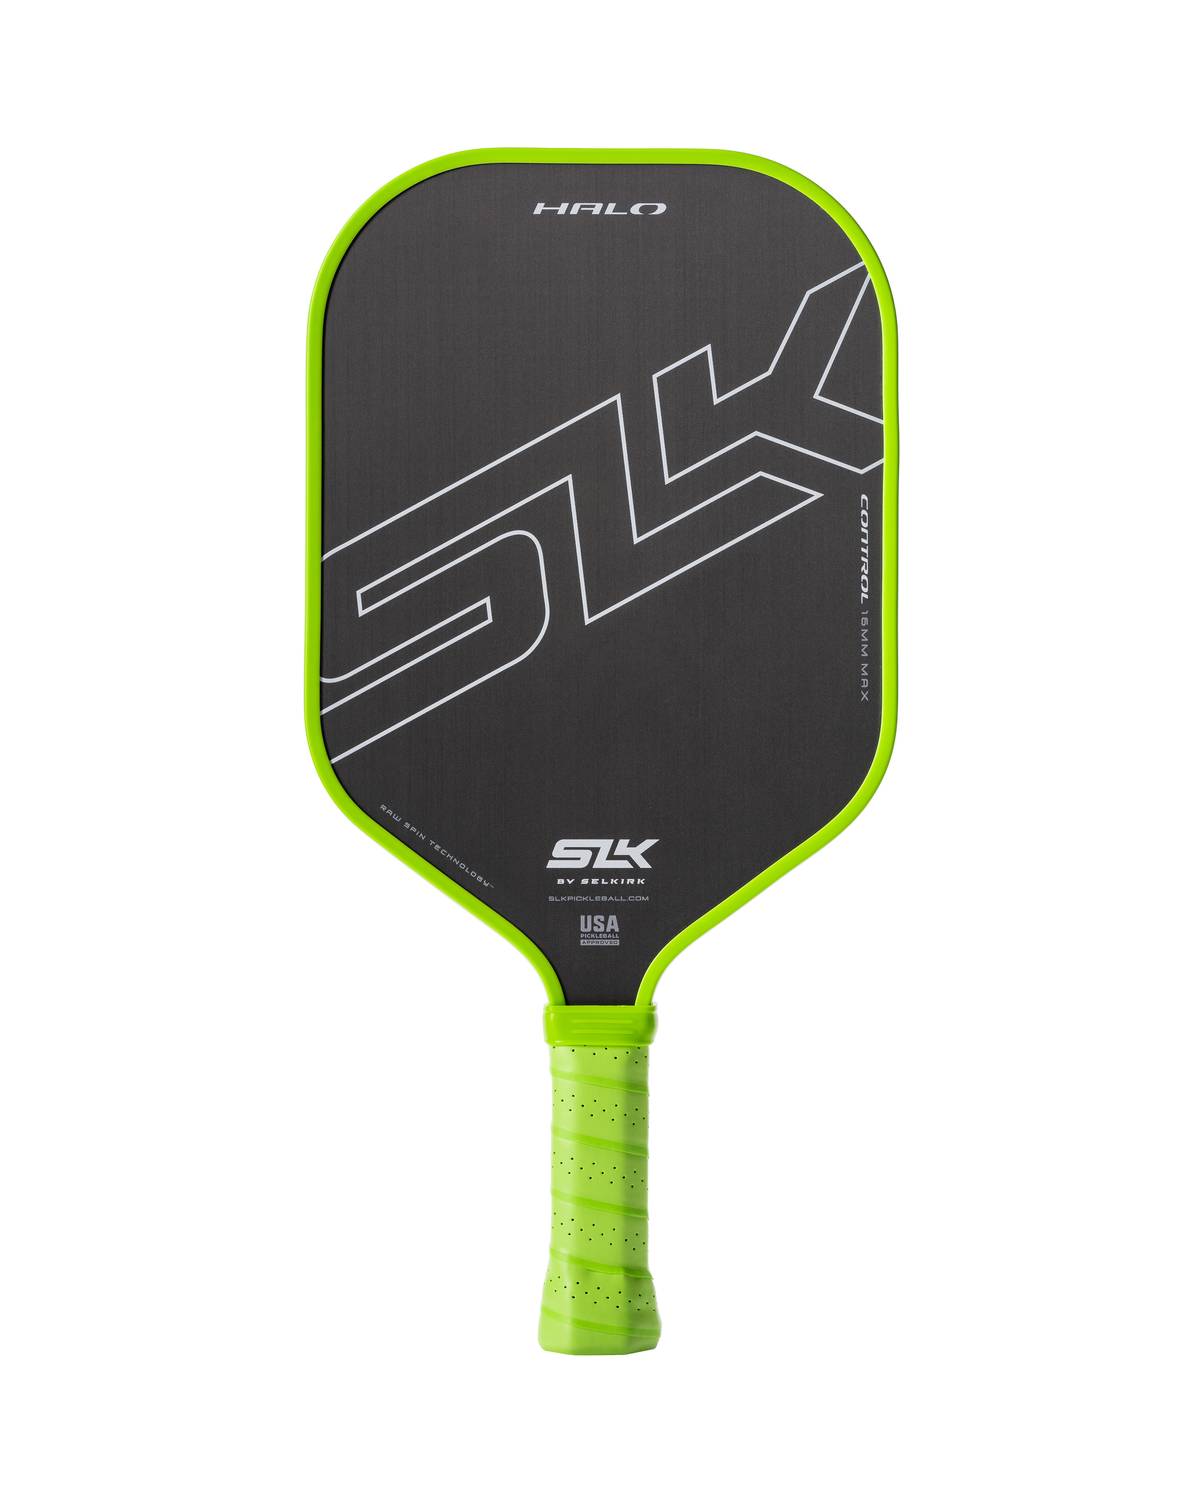 Choose a Selkirk SLK Halo Max Pickleball Paddle with the word slk on it.